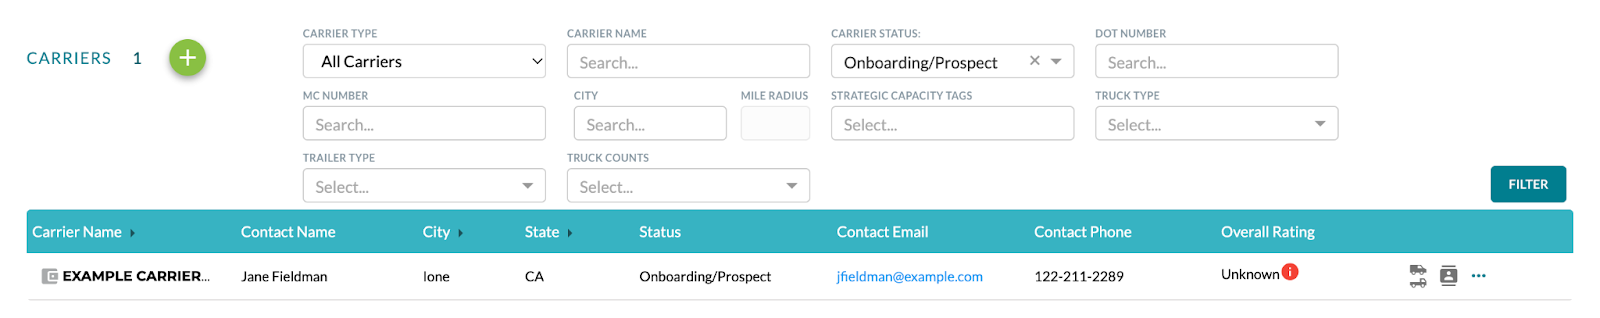 continue_carrier_onboarding_1.png